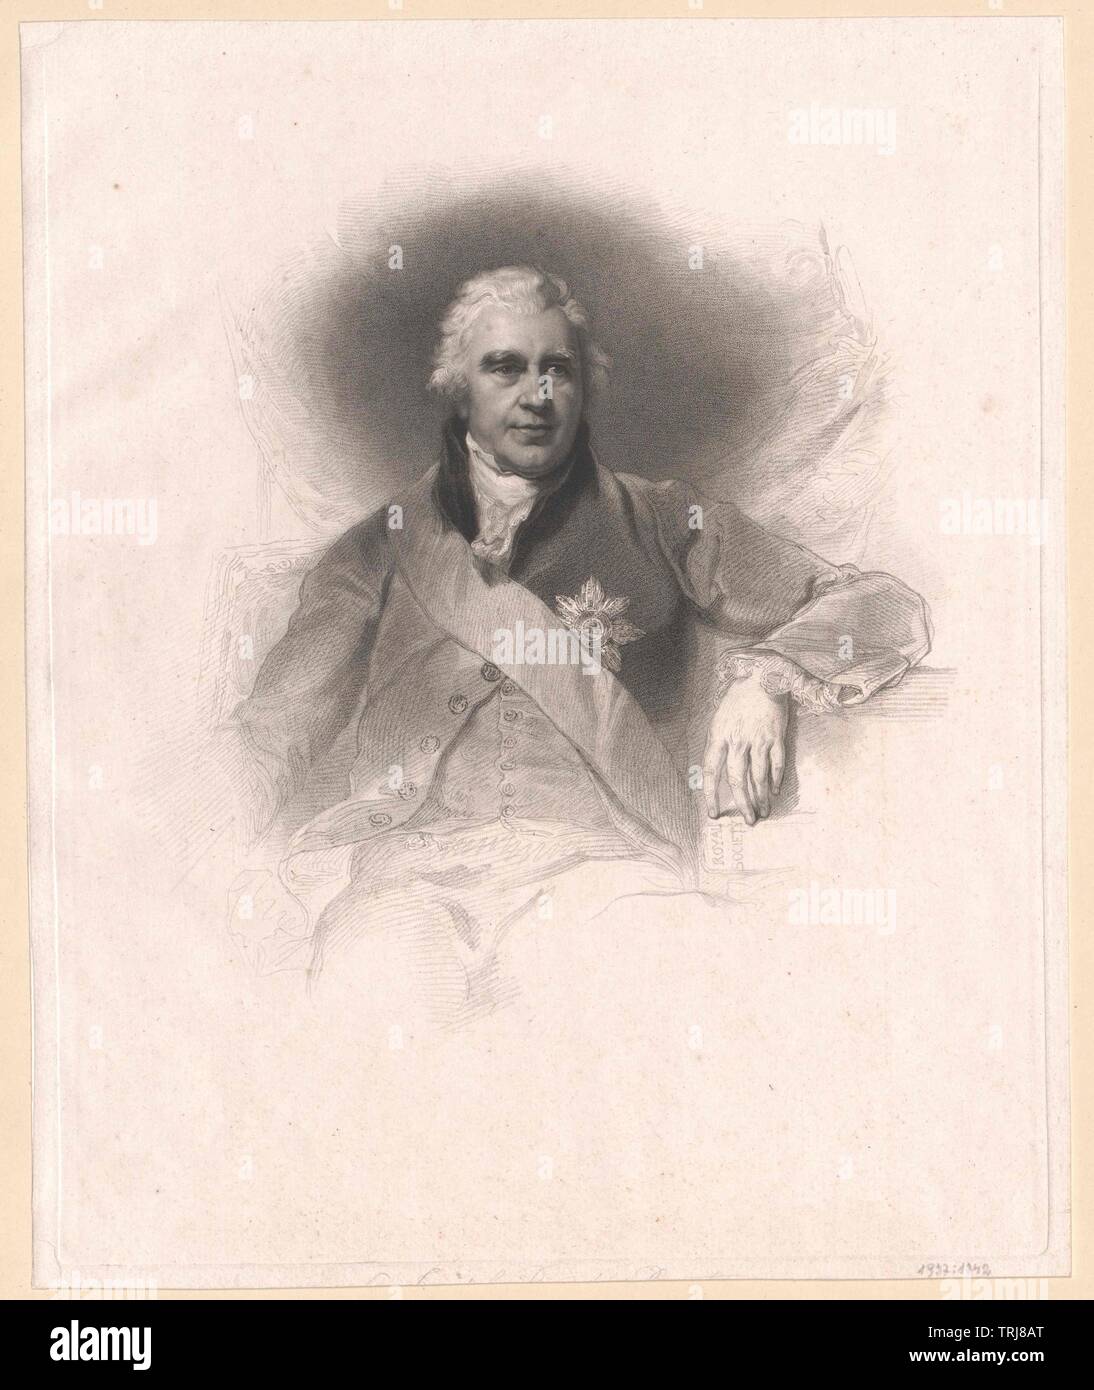 Banks, Joseph baronet, English natural scientist and explorer, president of the Royal society 1778, baronet 1781, Additional-Rights-Clearance-Info-Not-Available Stock Photo